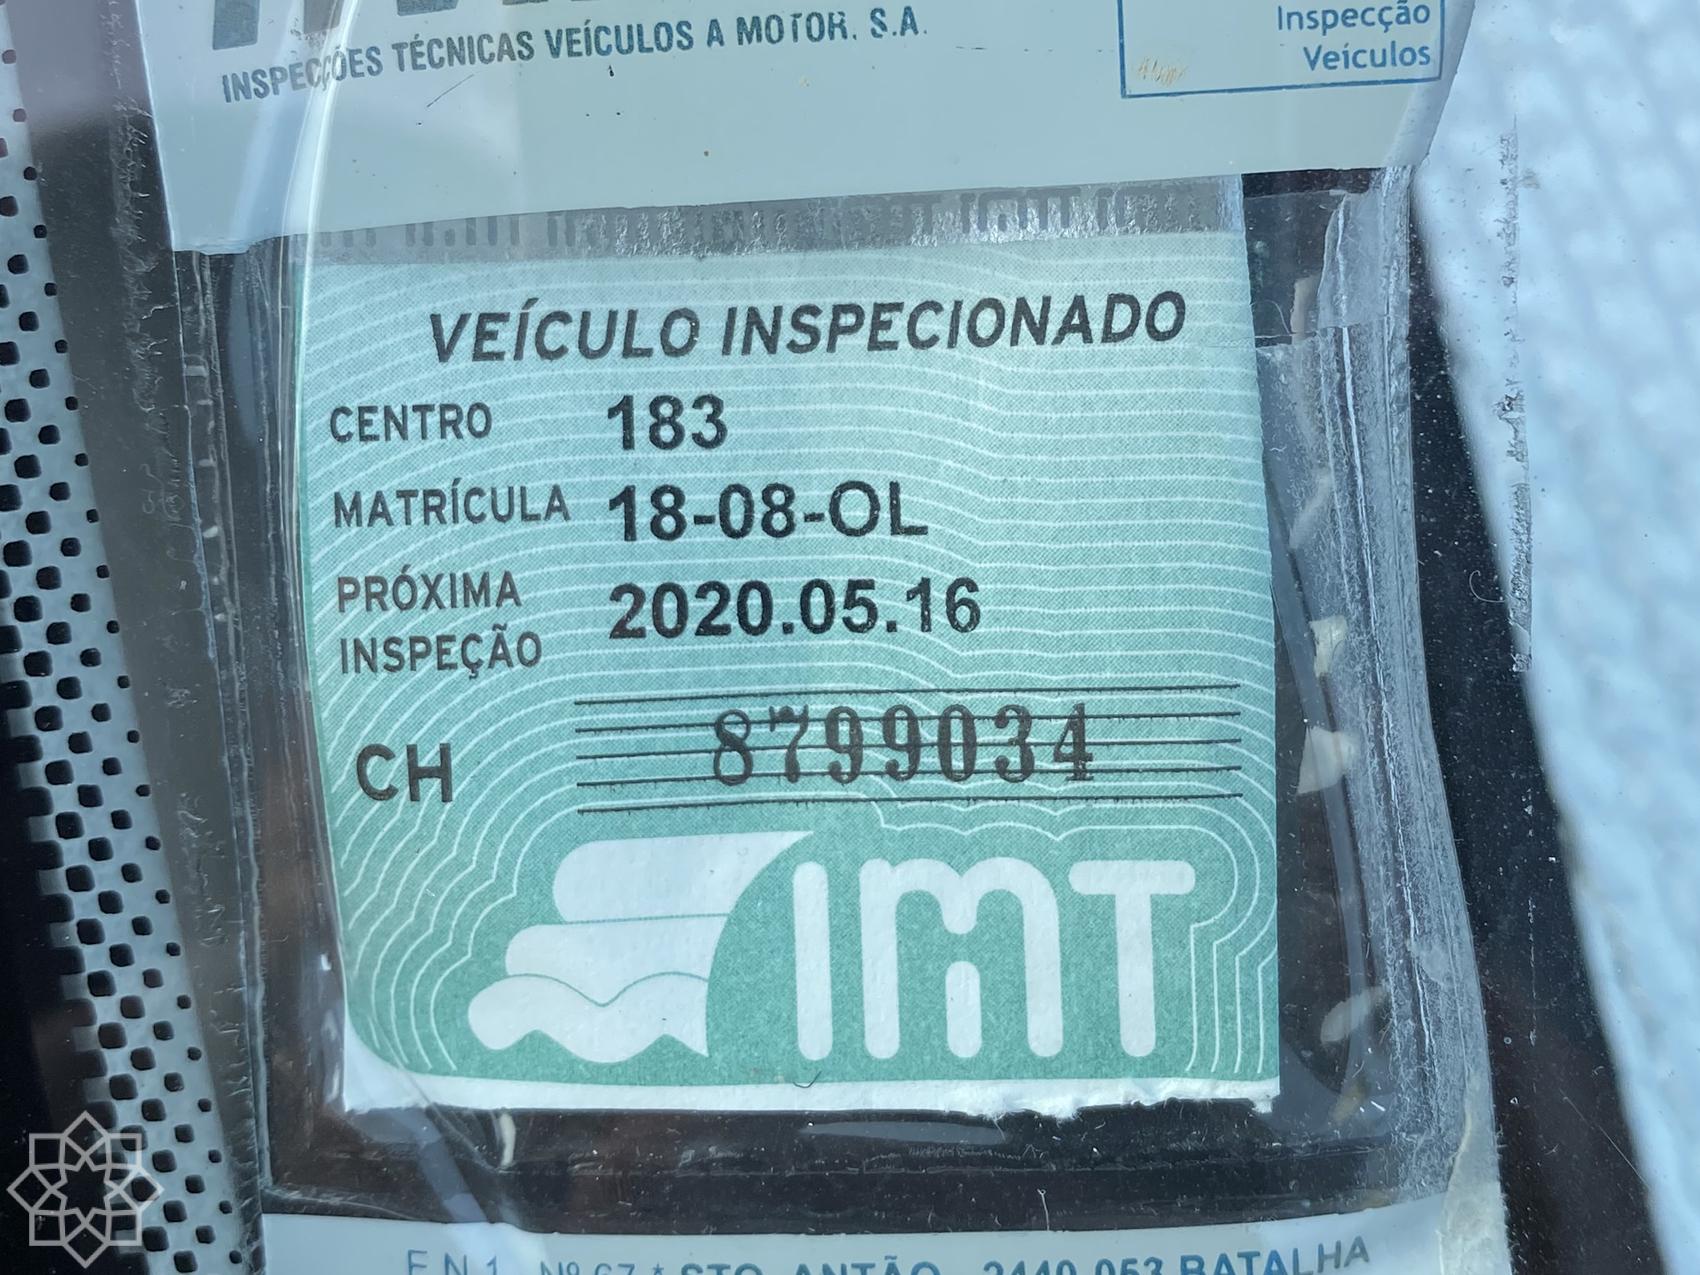 The green slip in the front window shows the last date for next inspection. In this case, May 16 but now with an exemption until Aug 13